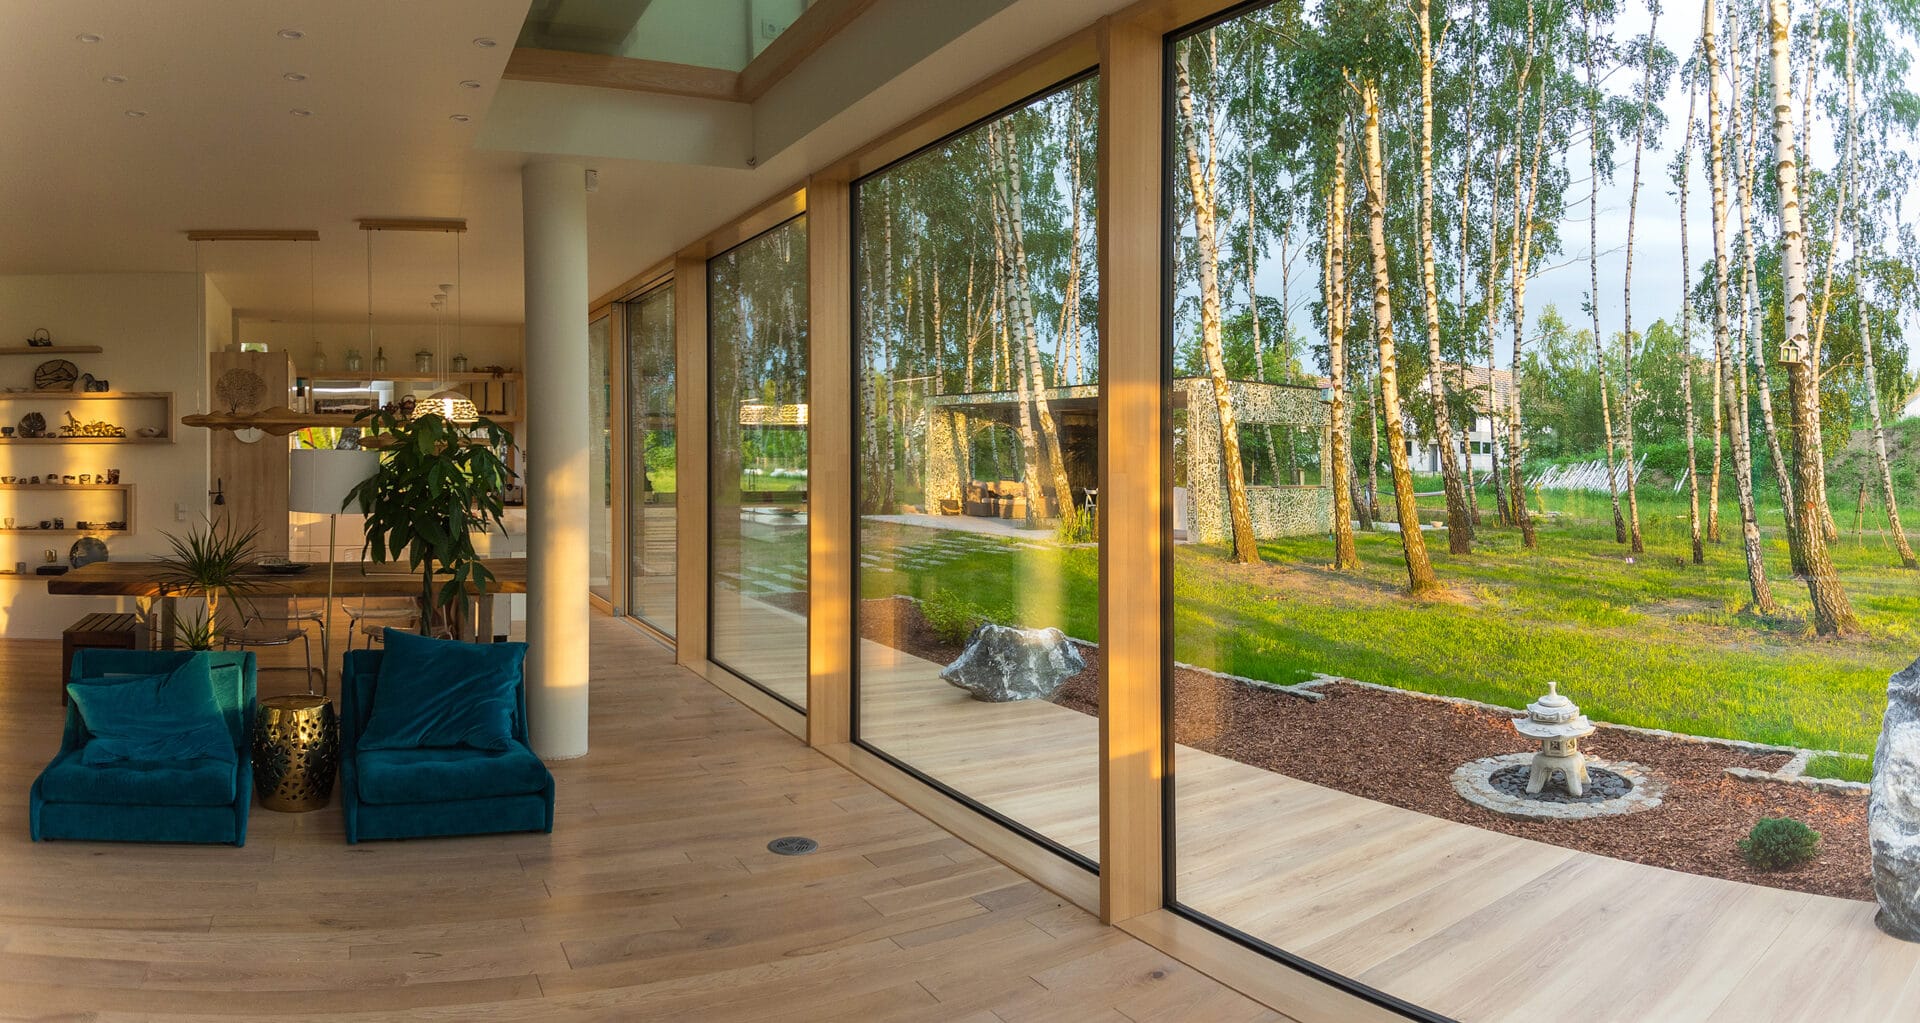 The back of this house features Pinus' Total Glass sliding door and windows